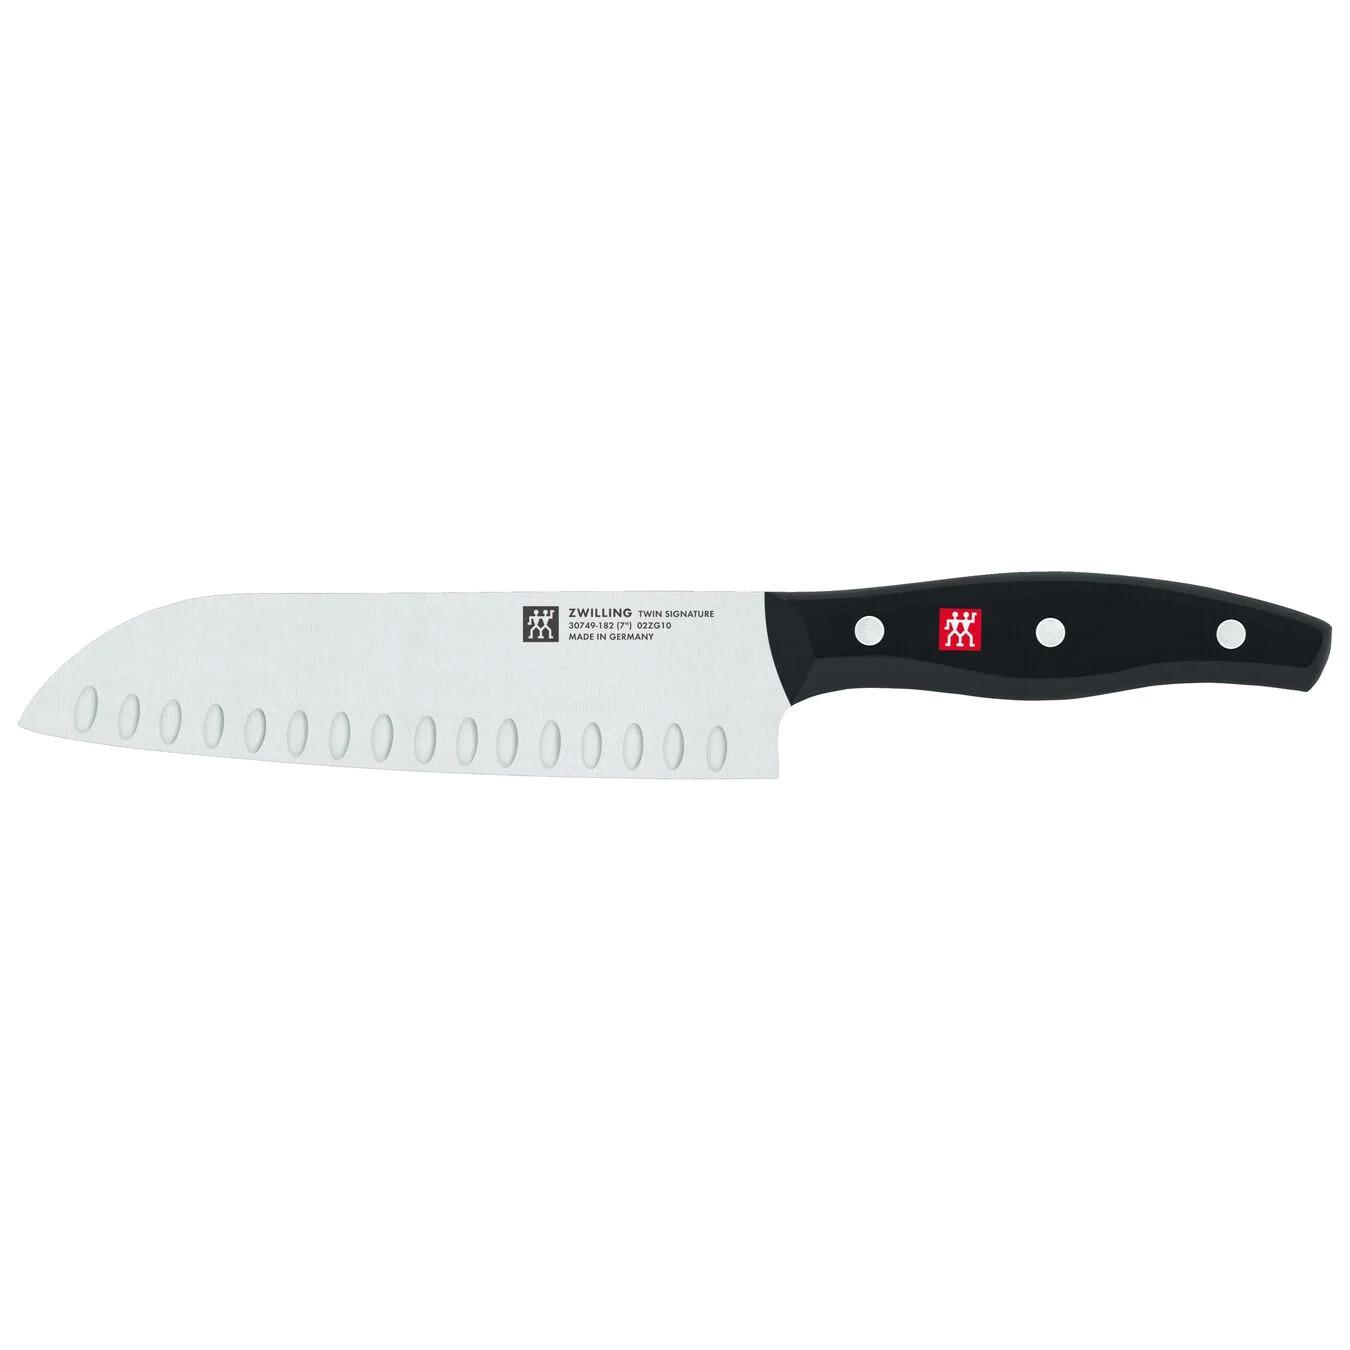 7in Zwilling Twin Signature Hollow Edge Santoku Knife for $29.99